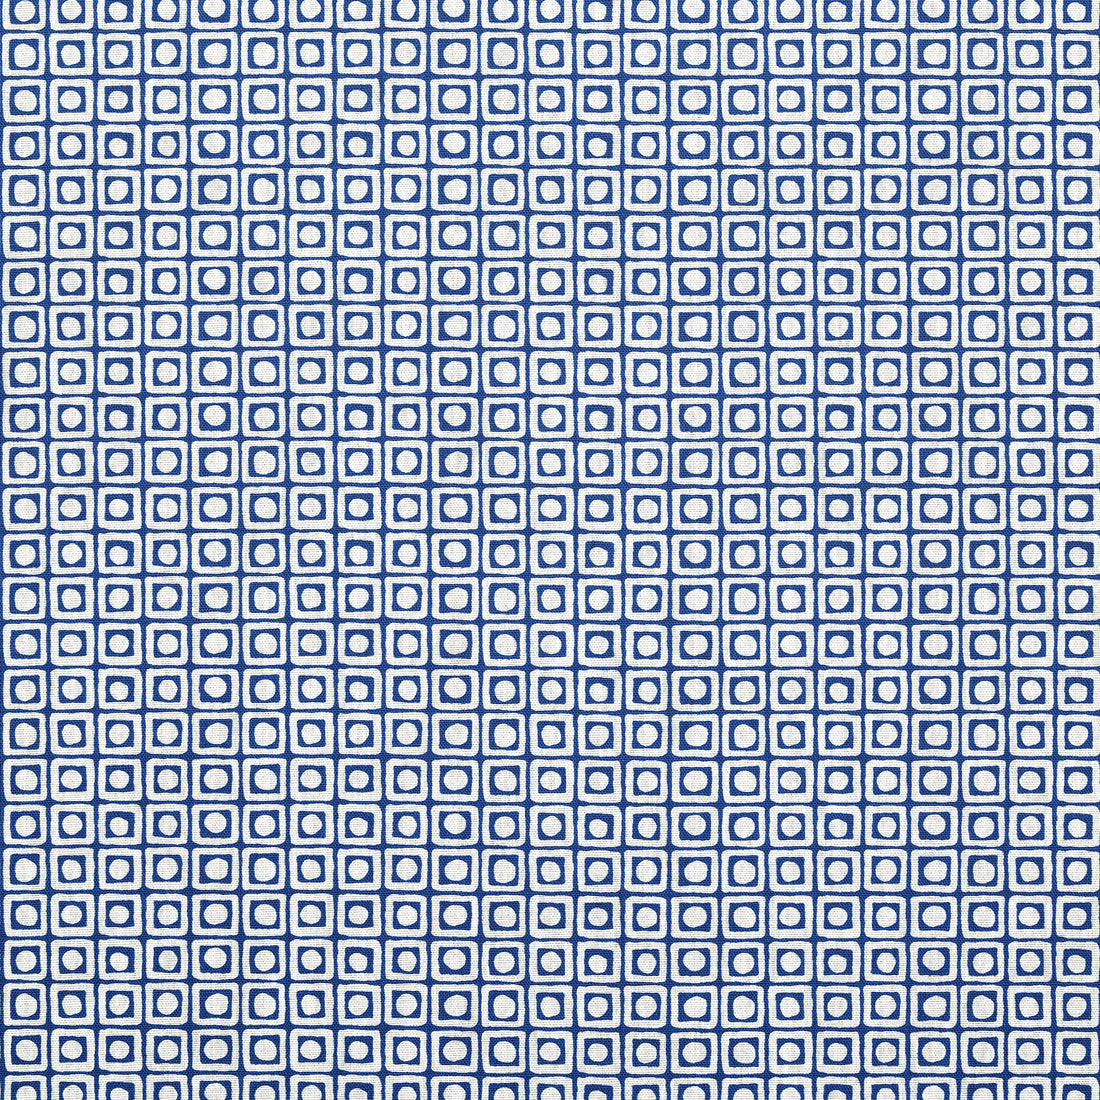 Santa Monica fabric in navy color - pattern number F913105 - by Thibaut in the Summer House collection